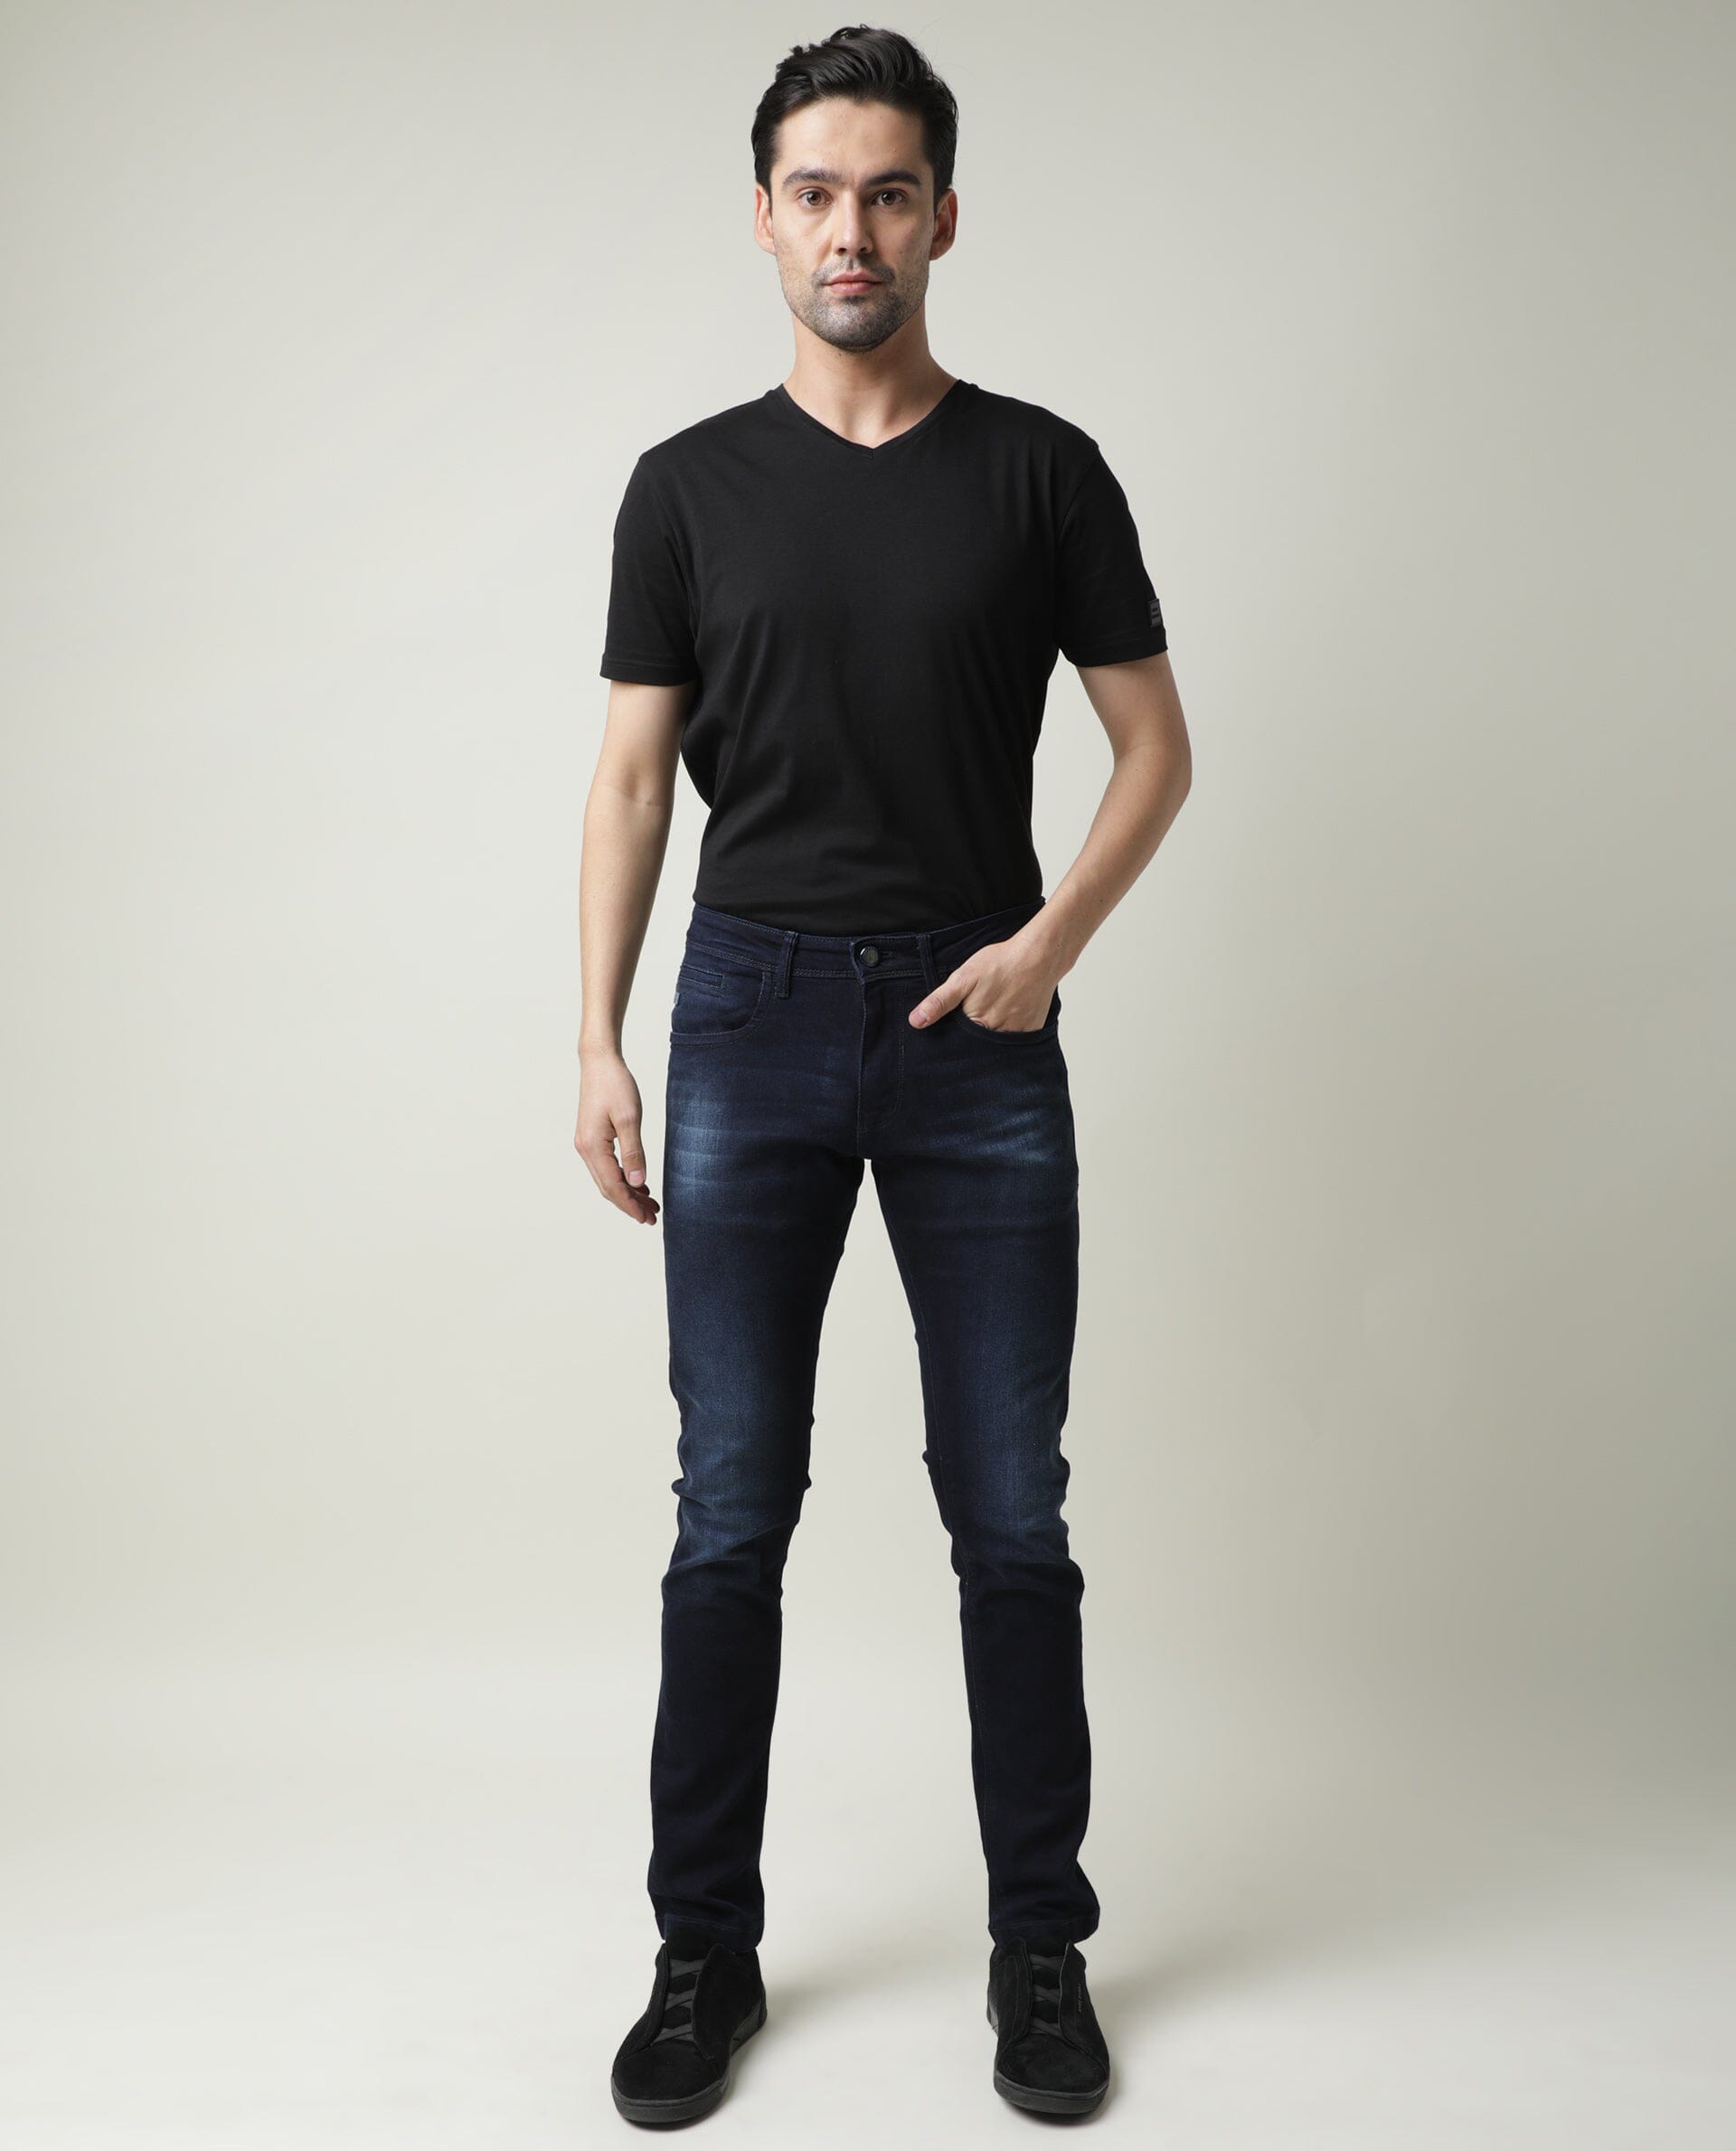 Athletic Fit Jeans in Dark Blue - TAILORED ATHLETE - USA